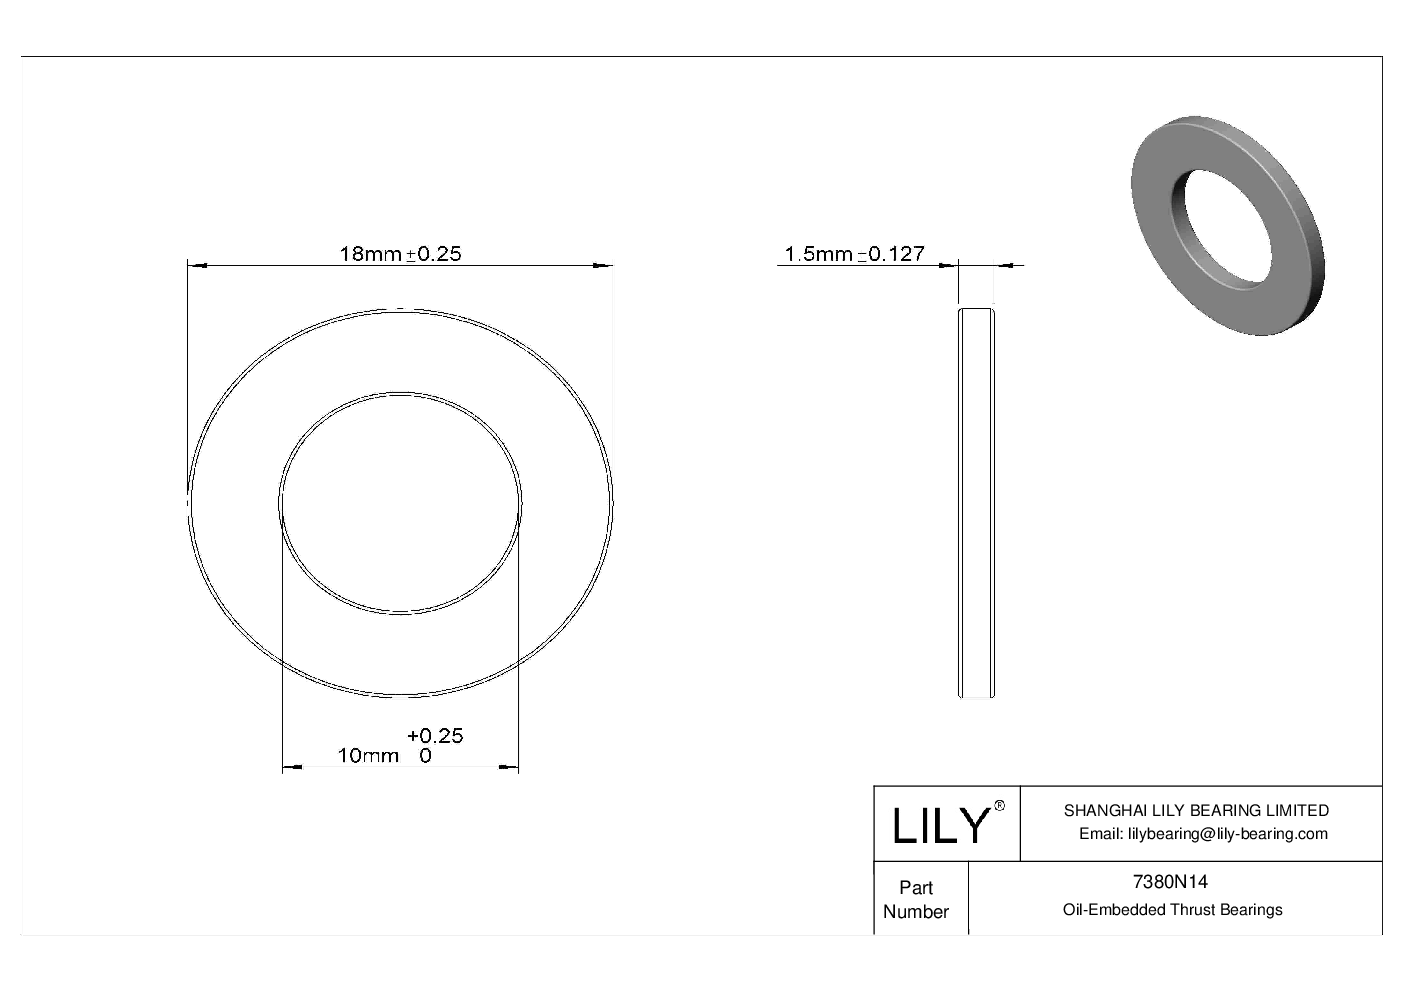 HDIANBE High-Load Ultra-Low-Friction Oil-Embedded Thrust Bearings cad drawing